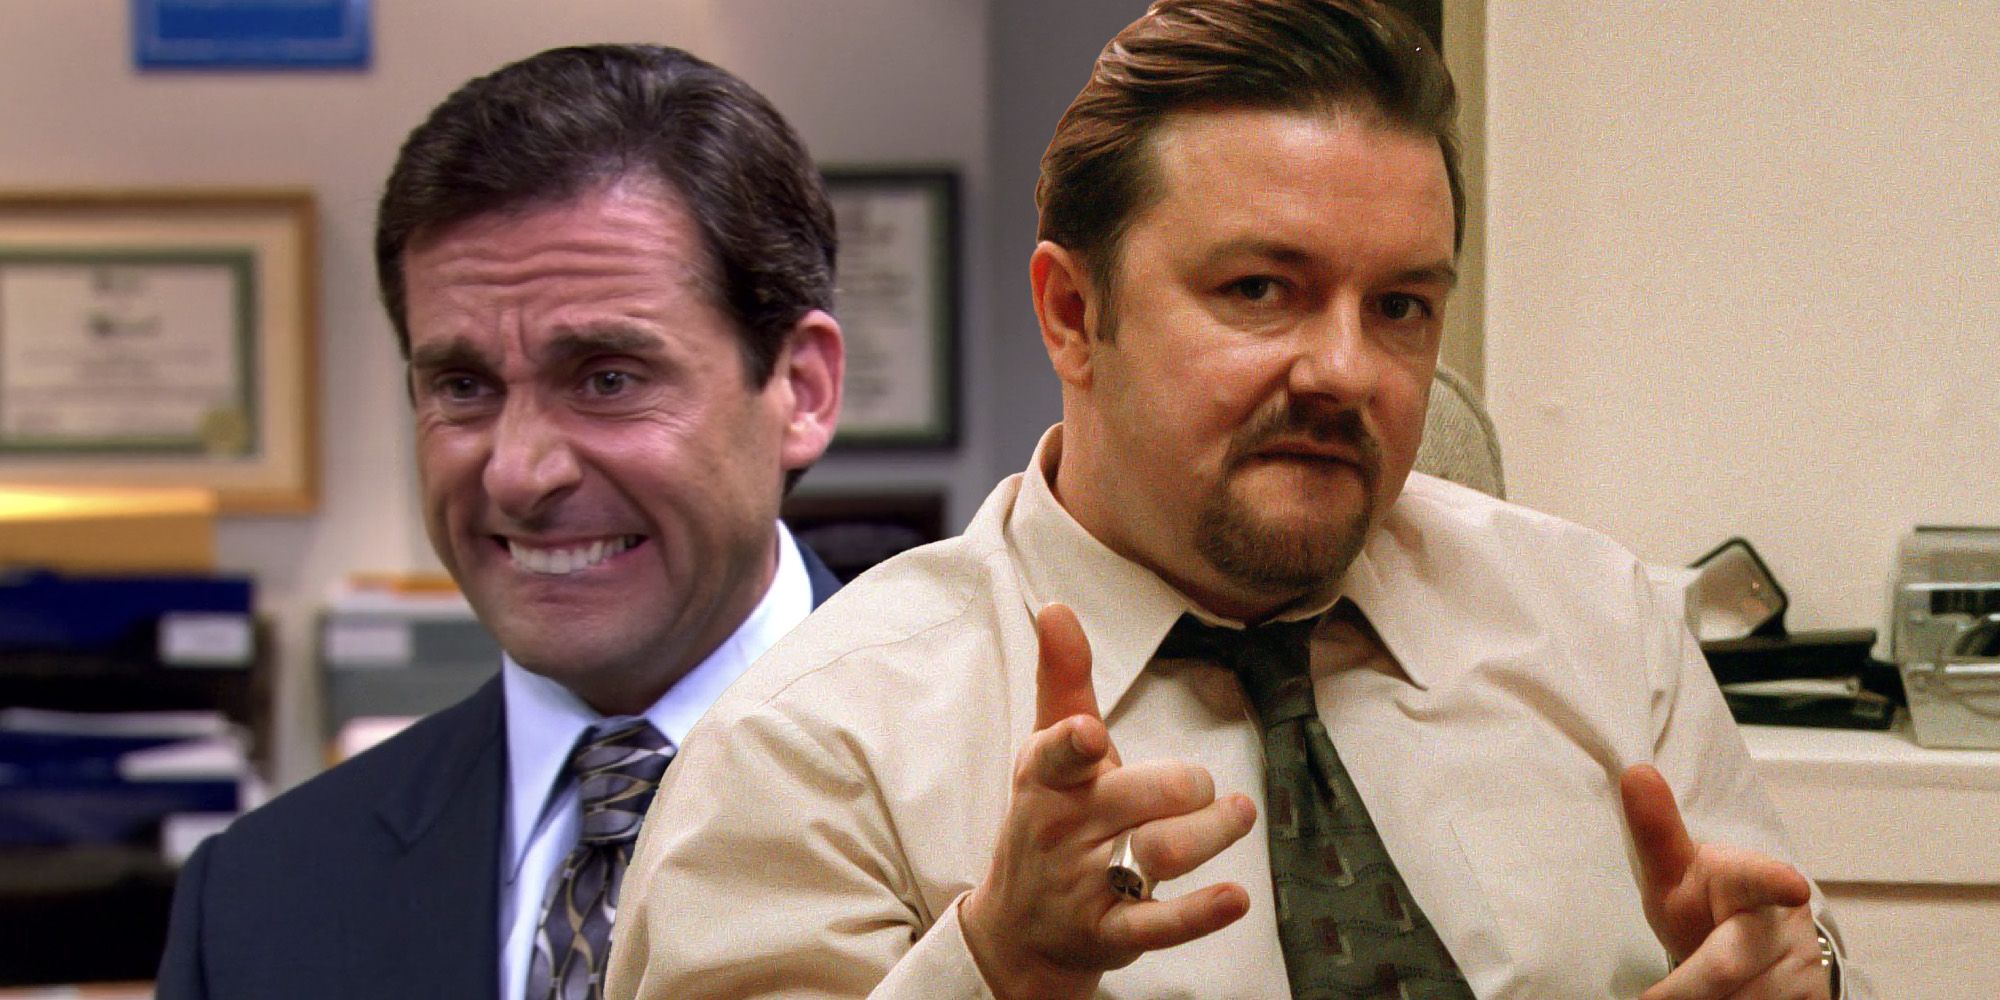 The Office US Vs. UK Versions: Differences Explained